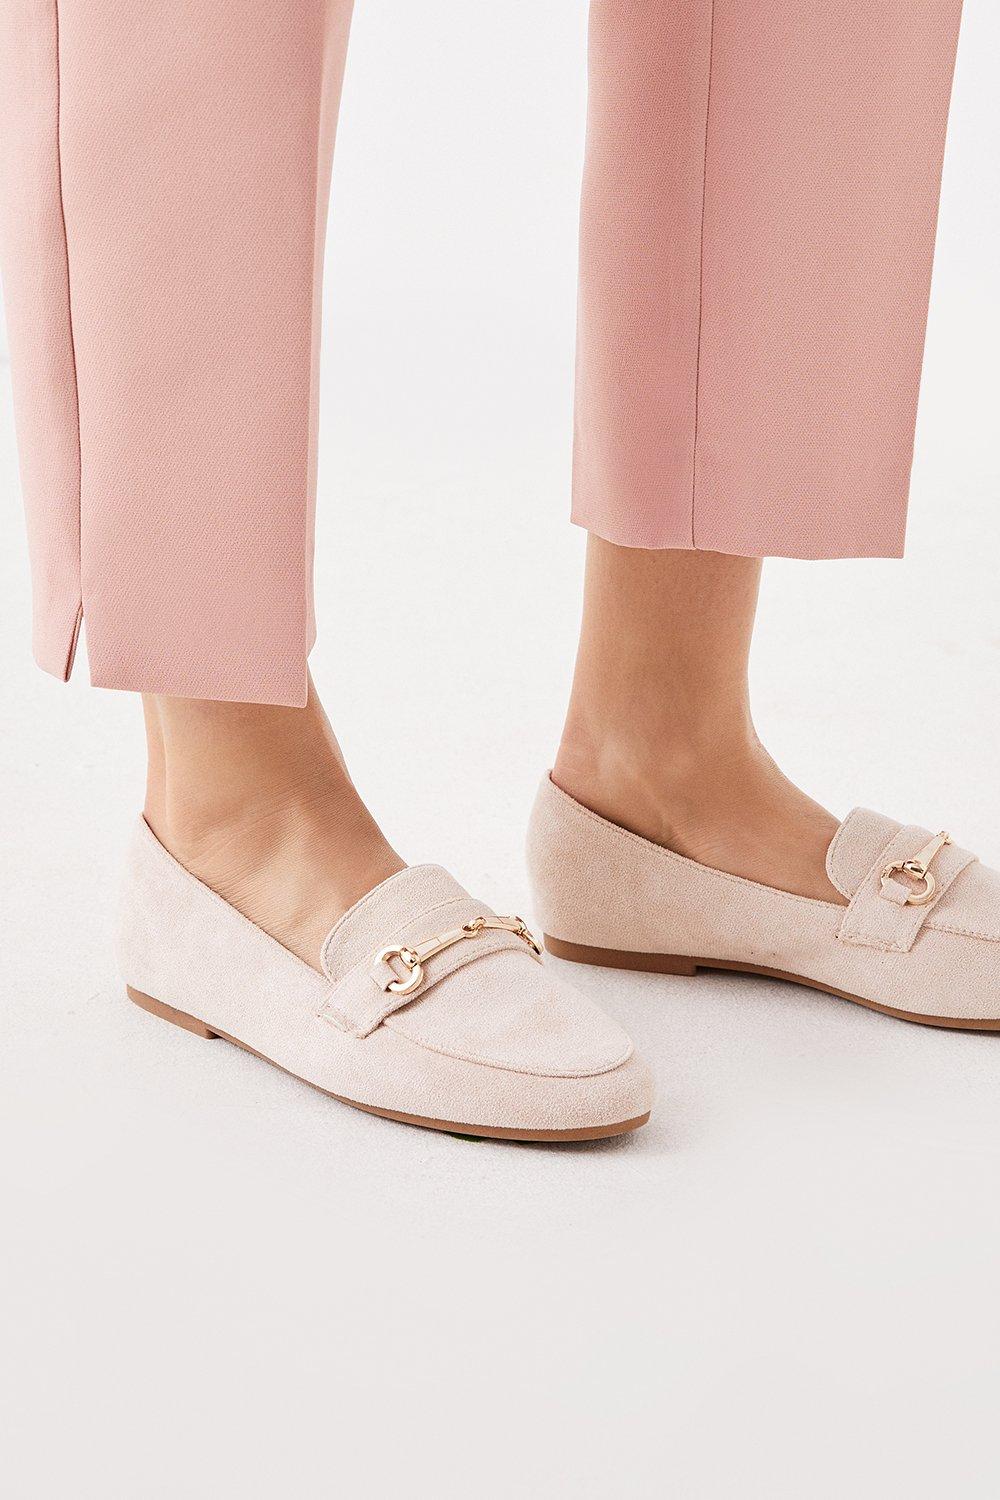 Women’s Lily Round Toe Trim Loafers - blush - 7